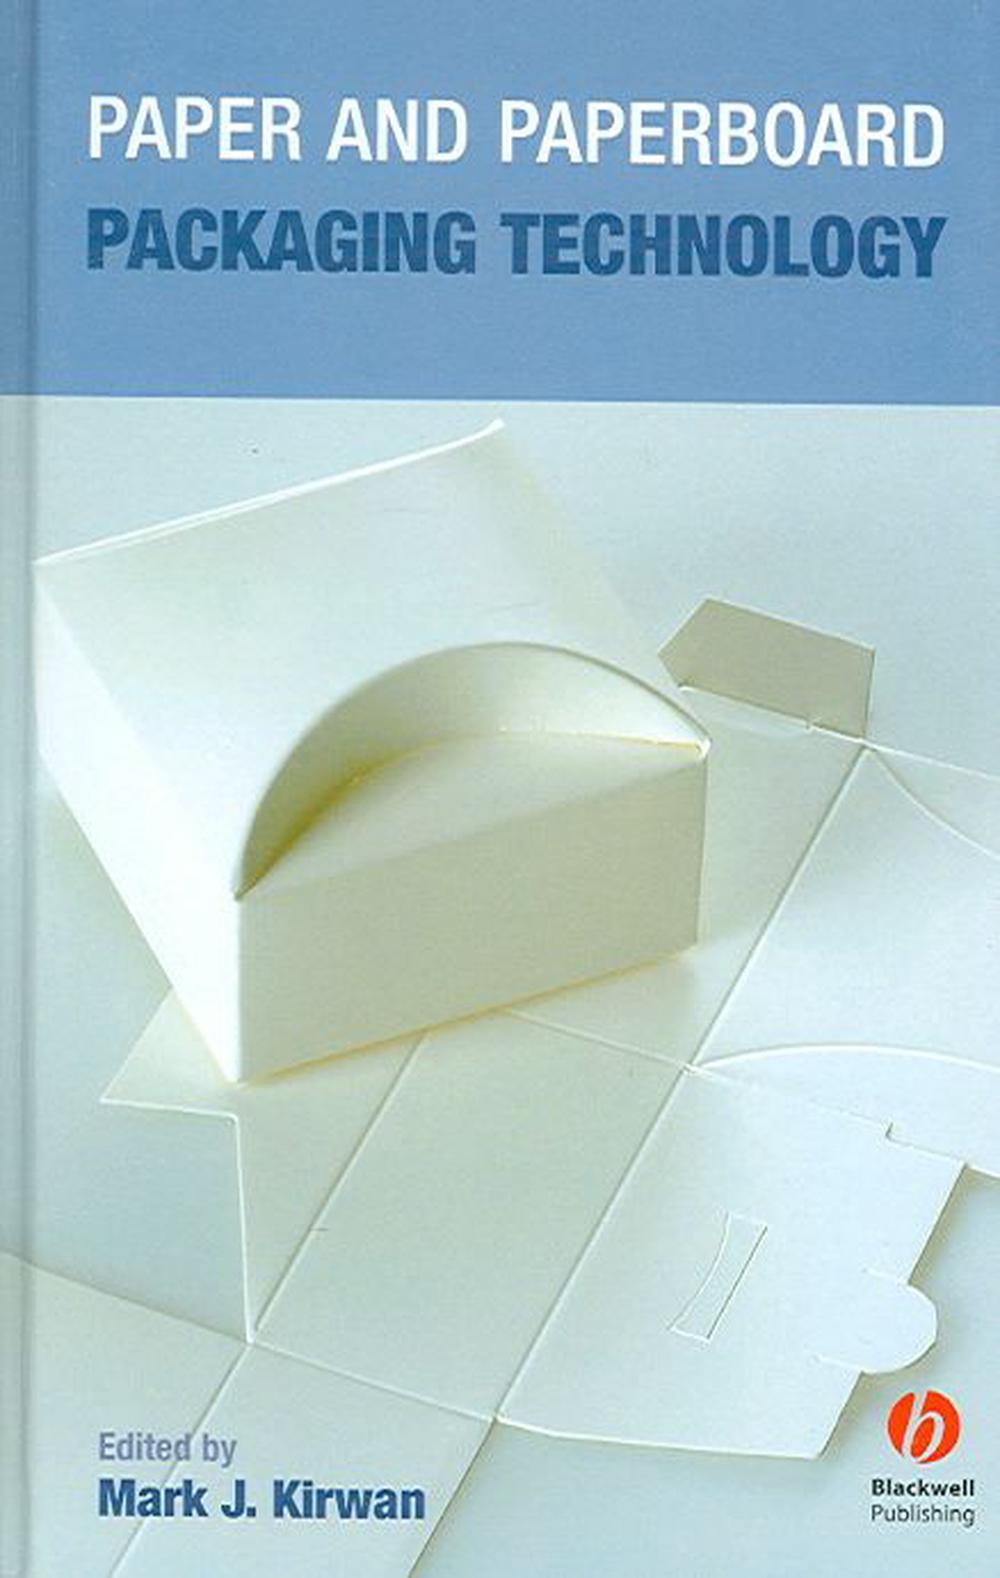 Paper and Paperboard Packaging Technology by Mark J. Kirwan (English) Hardcover 9781405125031 eBay